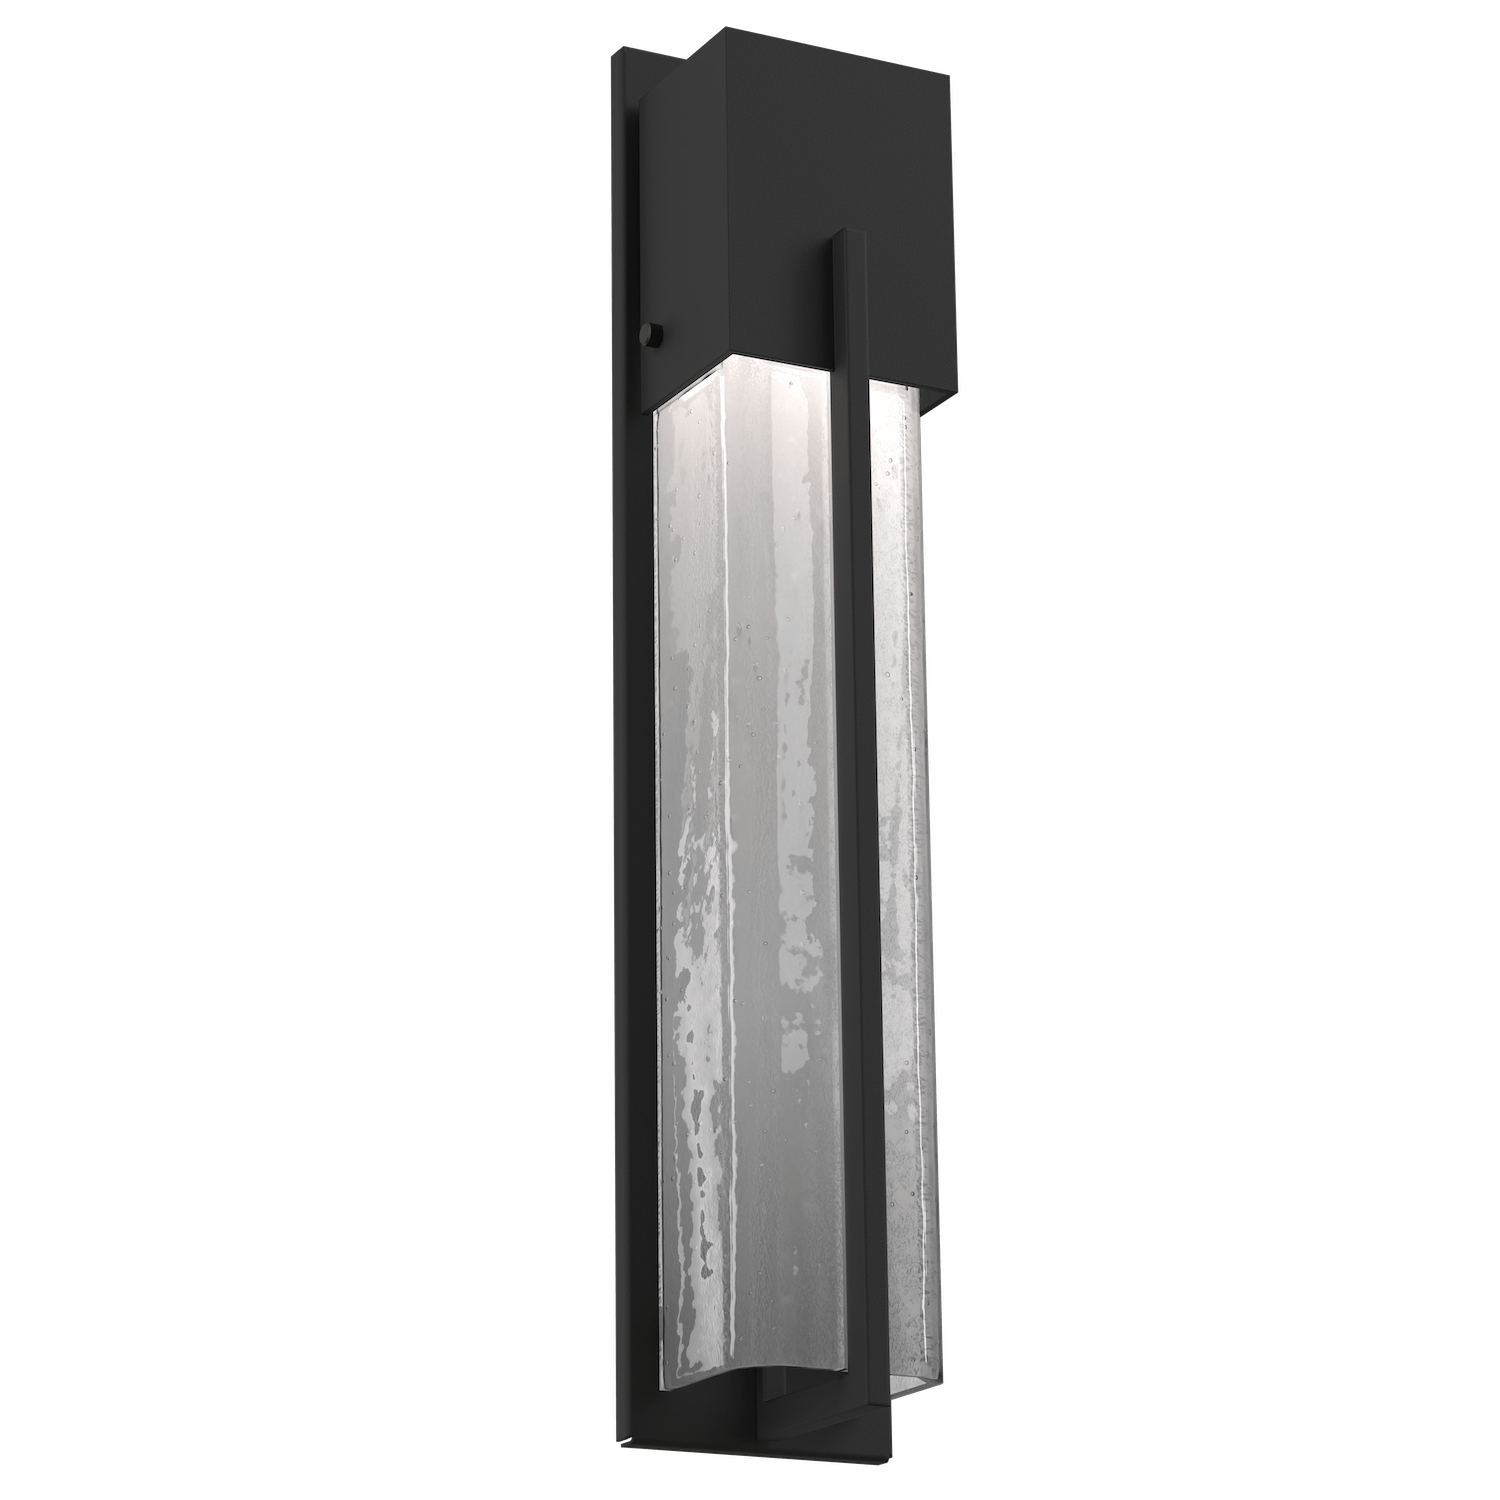 Hammerton Studio Square Outdoor Cover LED Sconce Outdoor l Wall Hammerton Studio 23 Textured Black (Outdoor) Frosted Granite